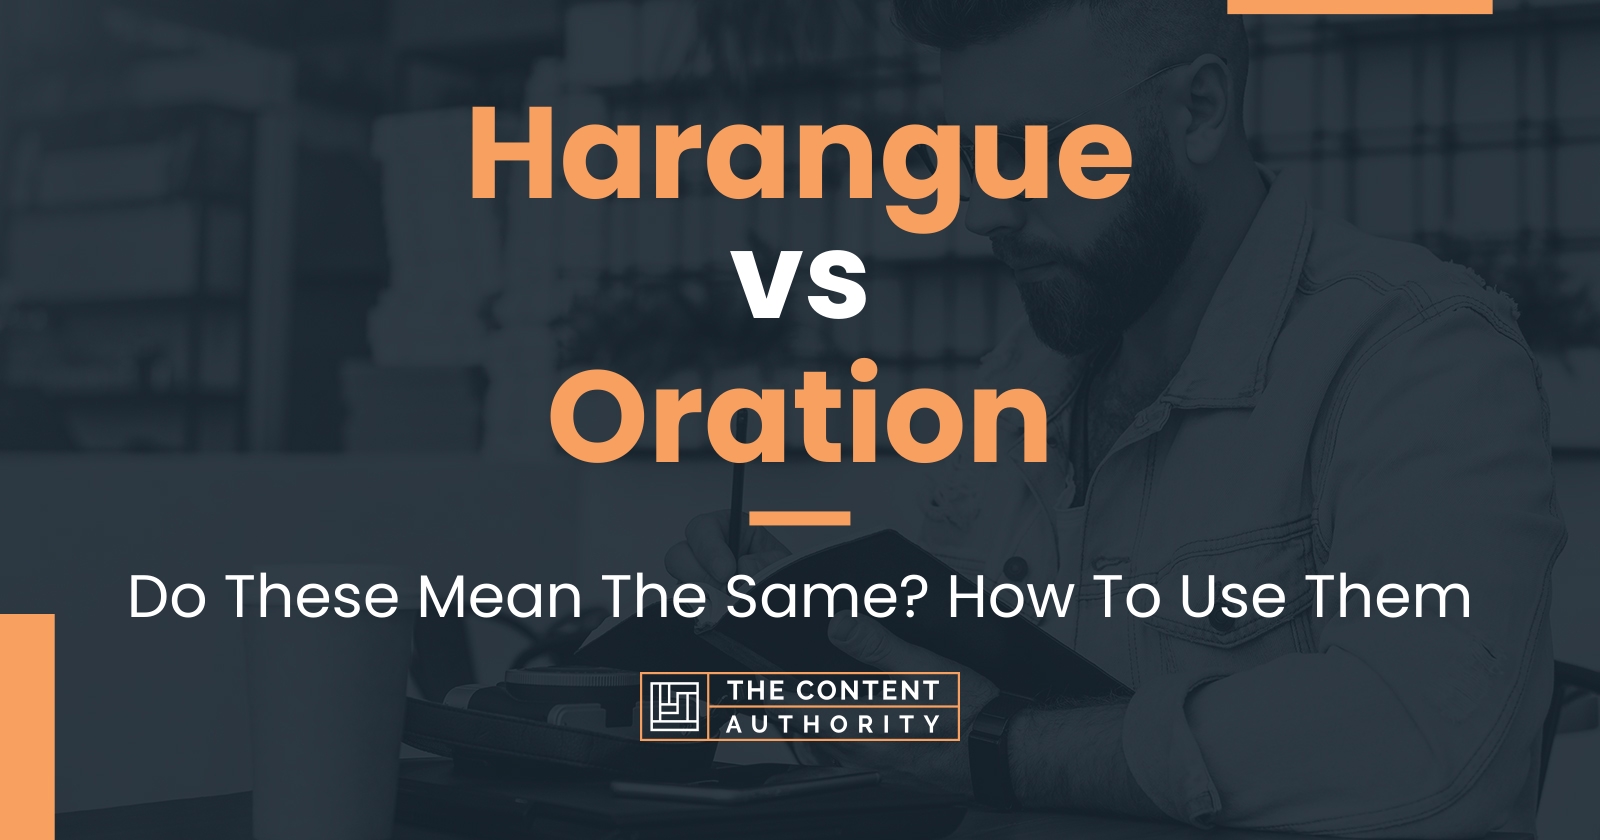 Harangue vs Oration: Do These Mean The Same? How To Use Them